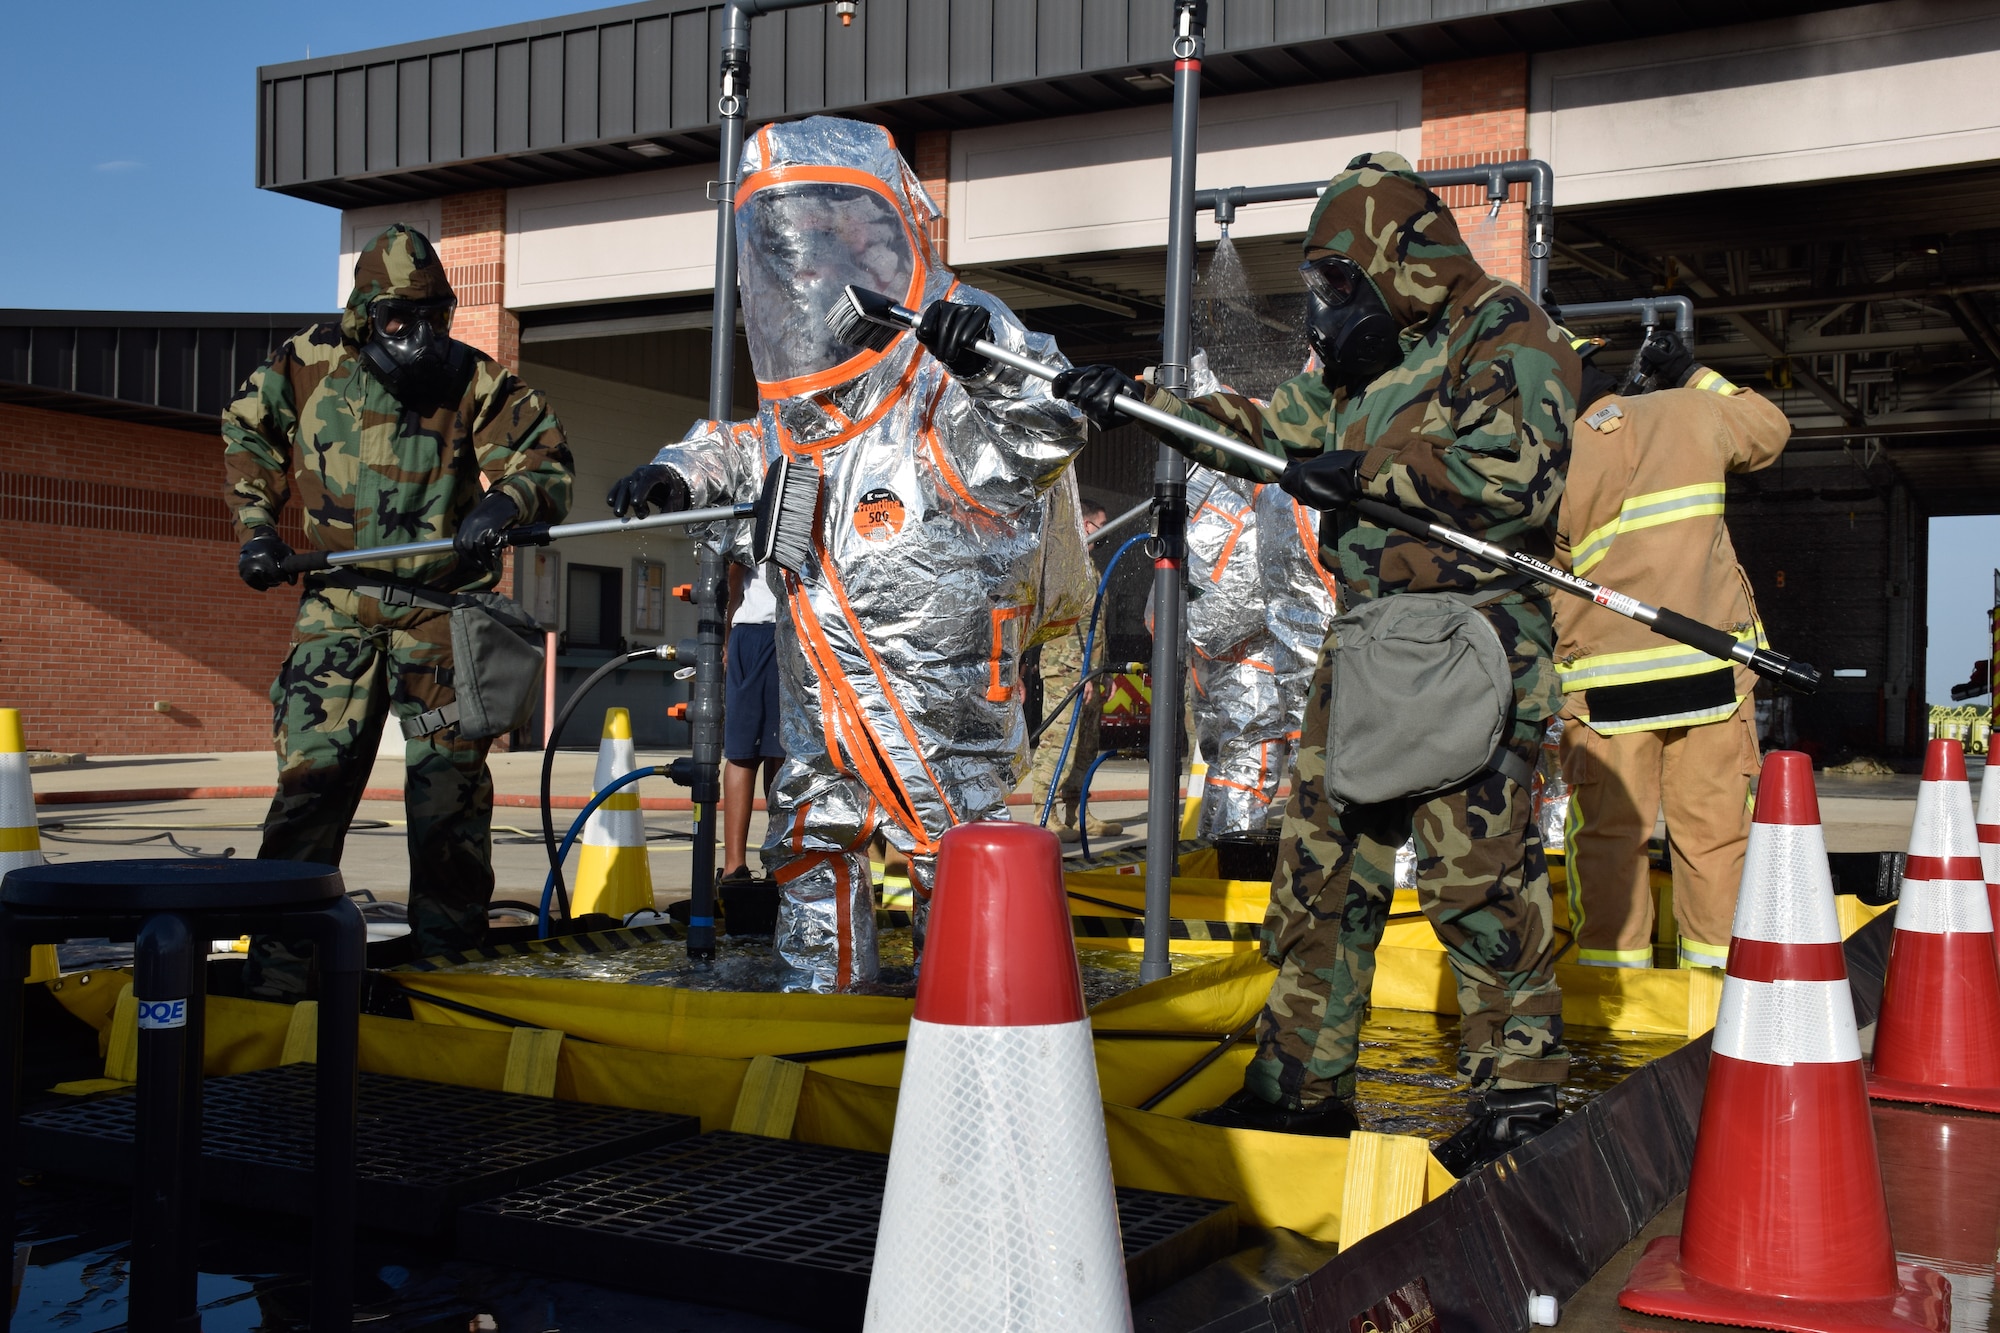 The 433rd Civil Engineer Squadron and Joint Base San Antonio Fire Department firefighters brush and wash the contaminates off of firefighters in hazardous material suits during a joint training exercise at Joint Base San Antonio-Lackland, Texas, April 8, 2021. The 433rd CES and JBSA Fire Department firefighters wore mission oriented protective posture gear and HAZMAT suits to protect themselves against simulated contaminates from patients and personnel. (U.S. Air Force photo by Senior Airman Brittany Wich)